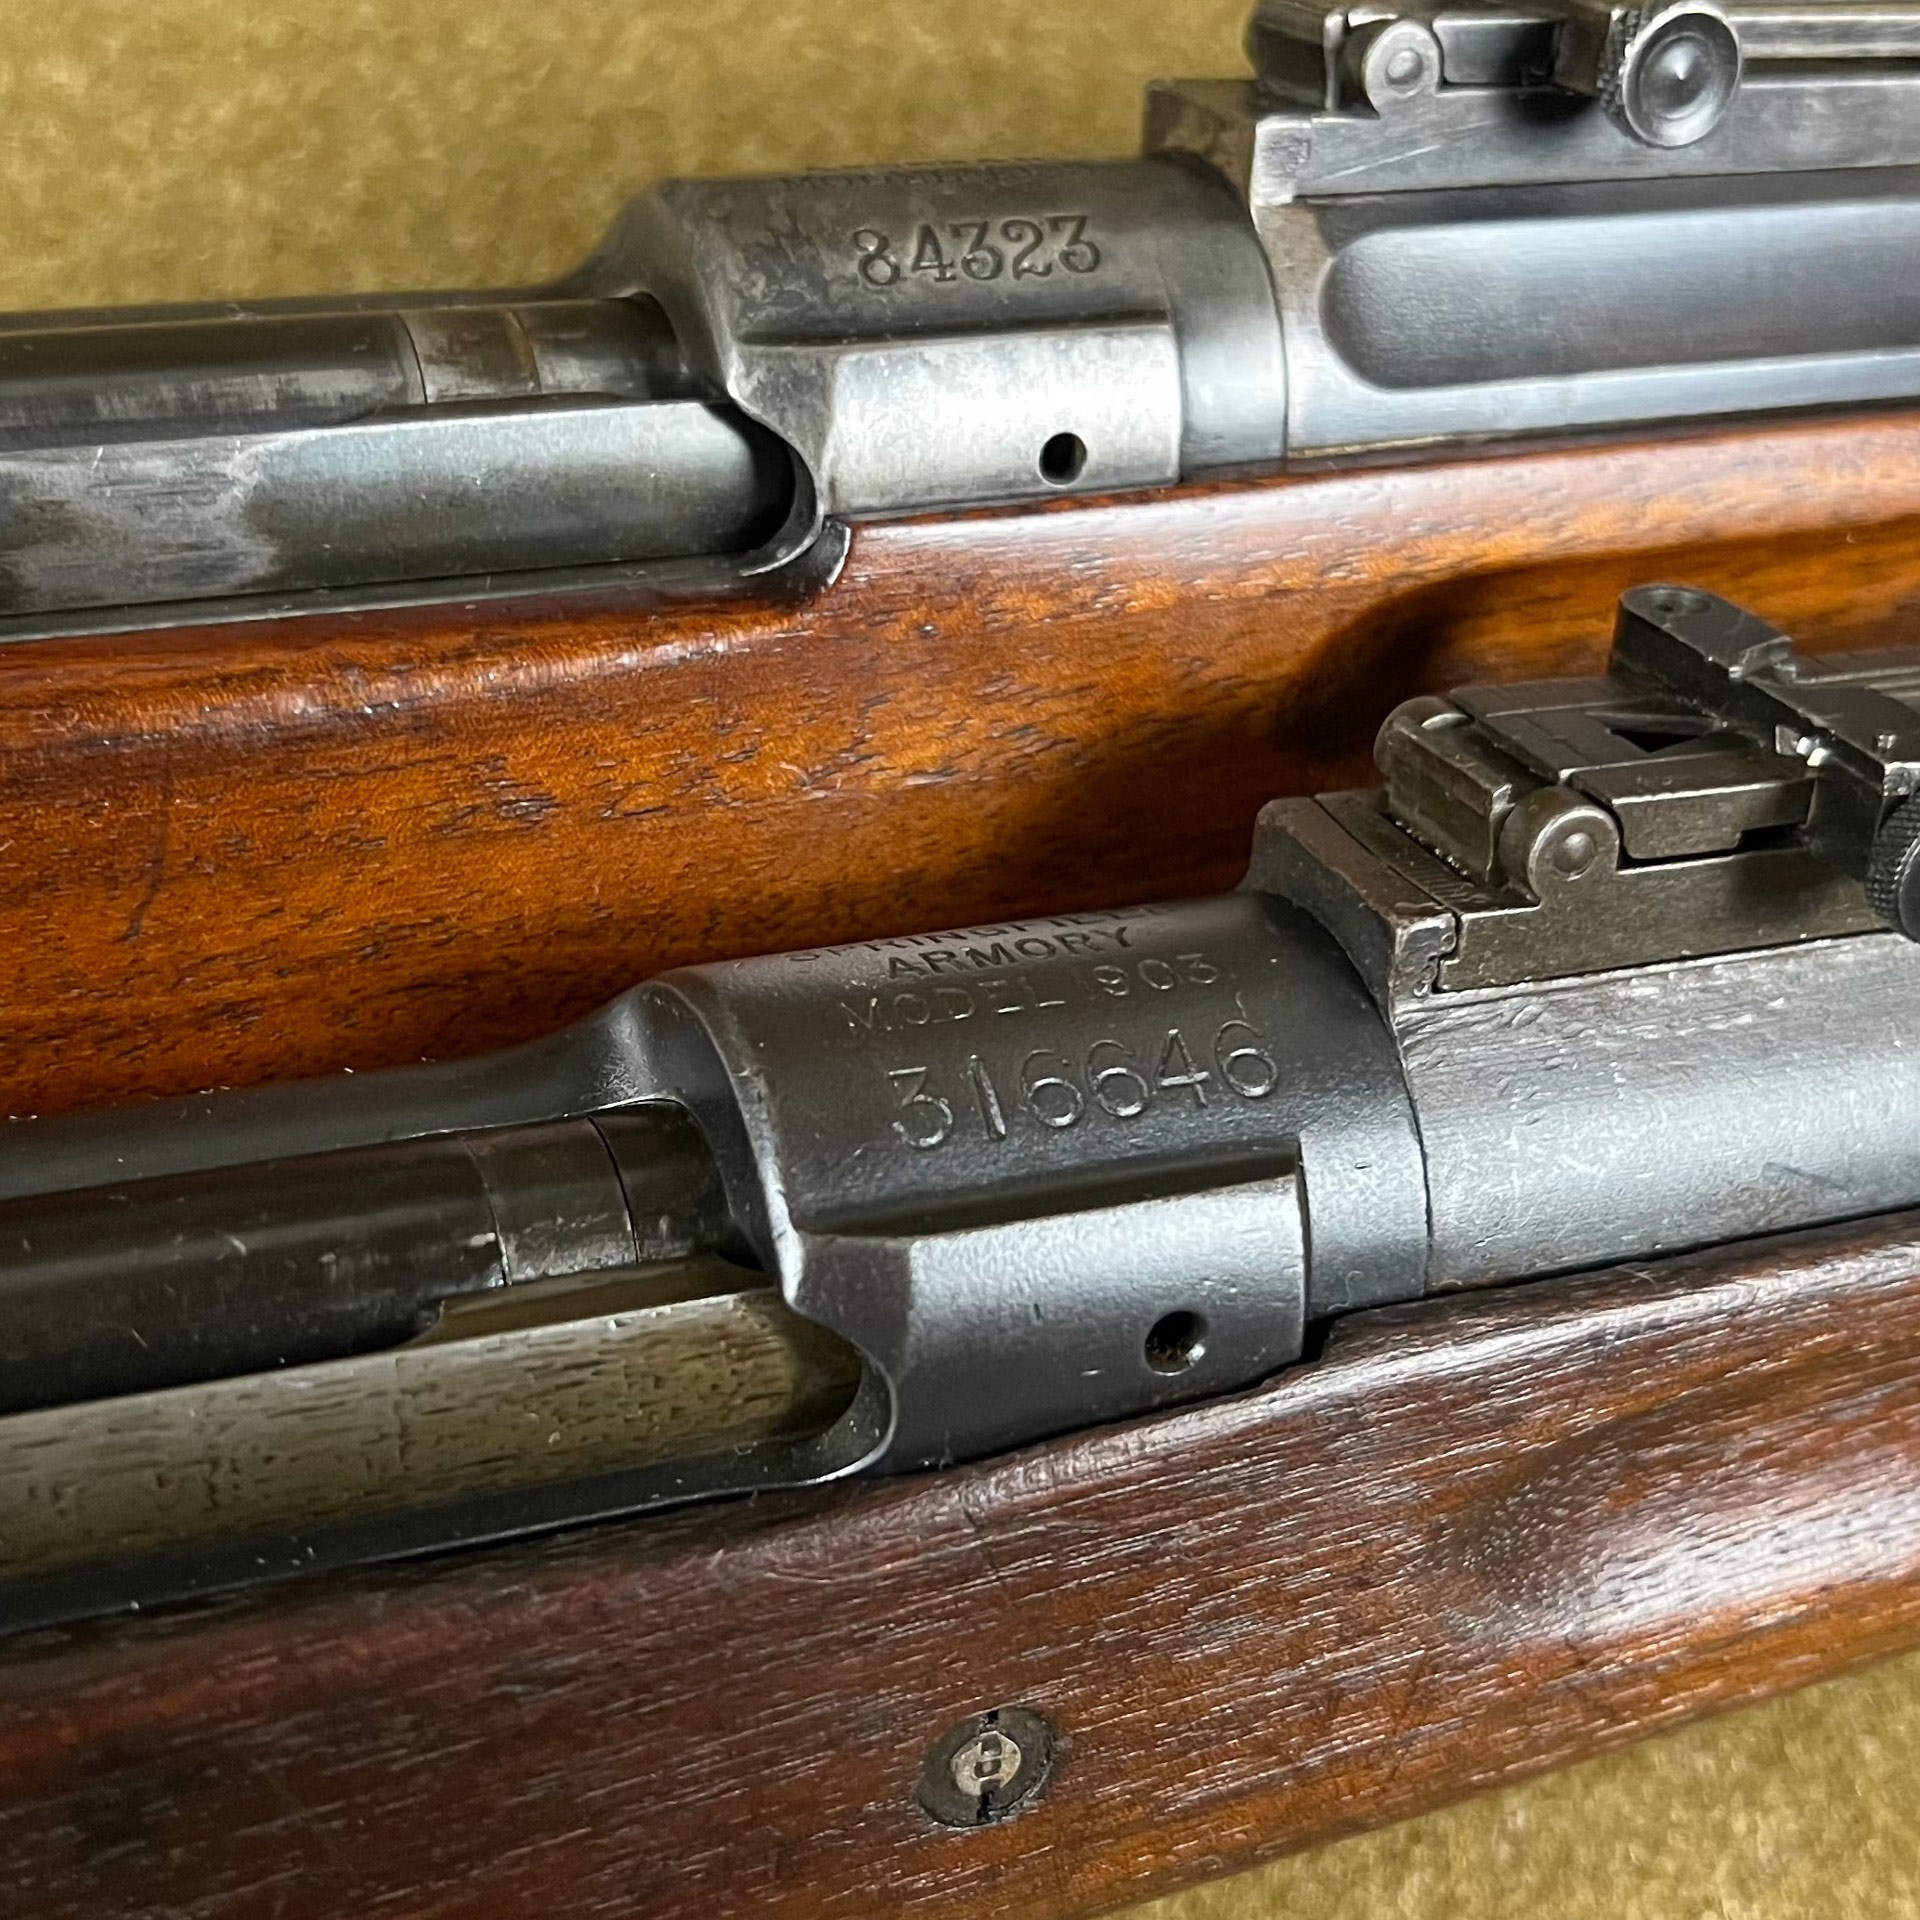 Comparison between two wood-stocked military surplus M1903 rifles